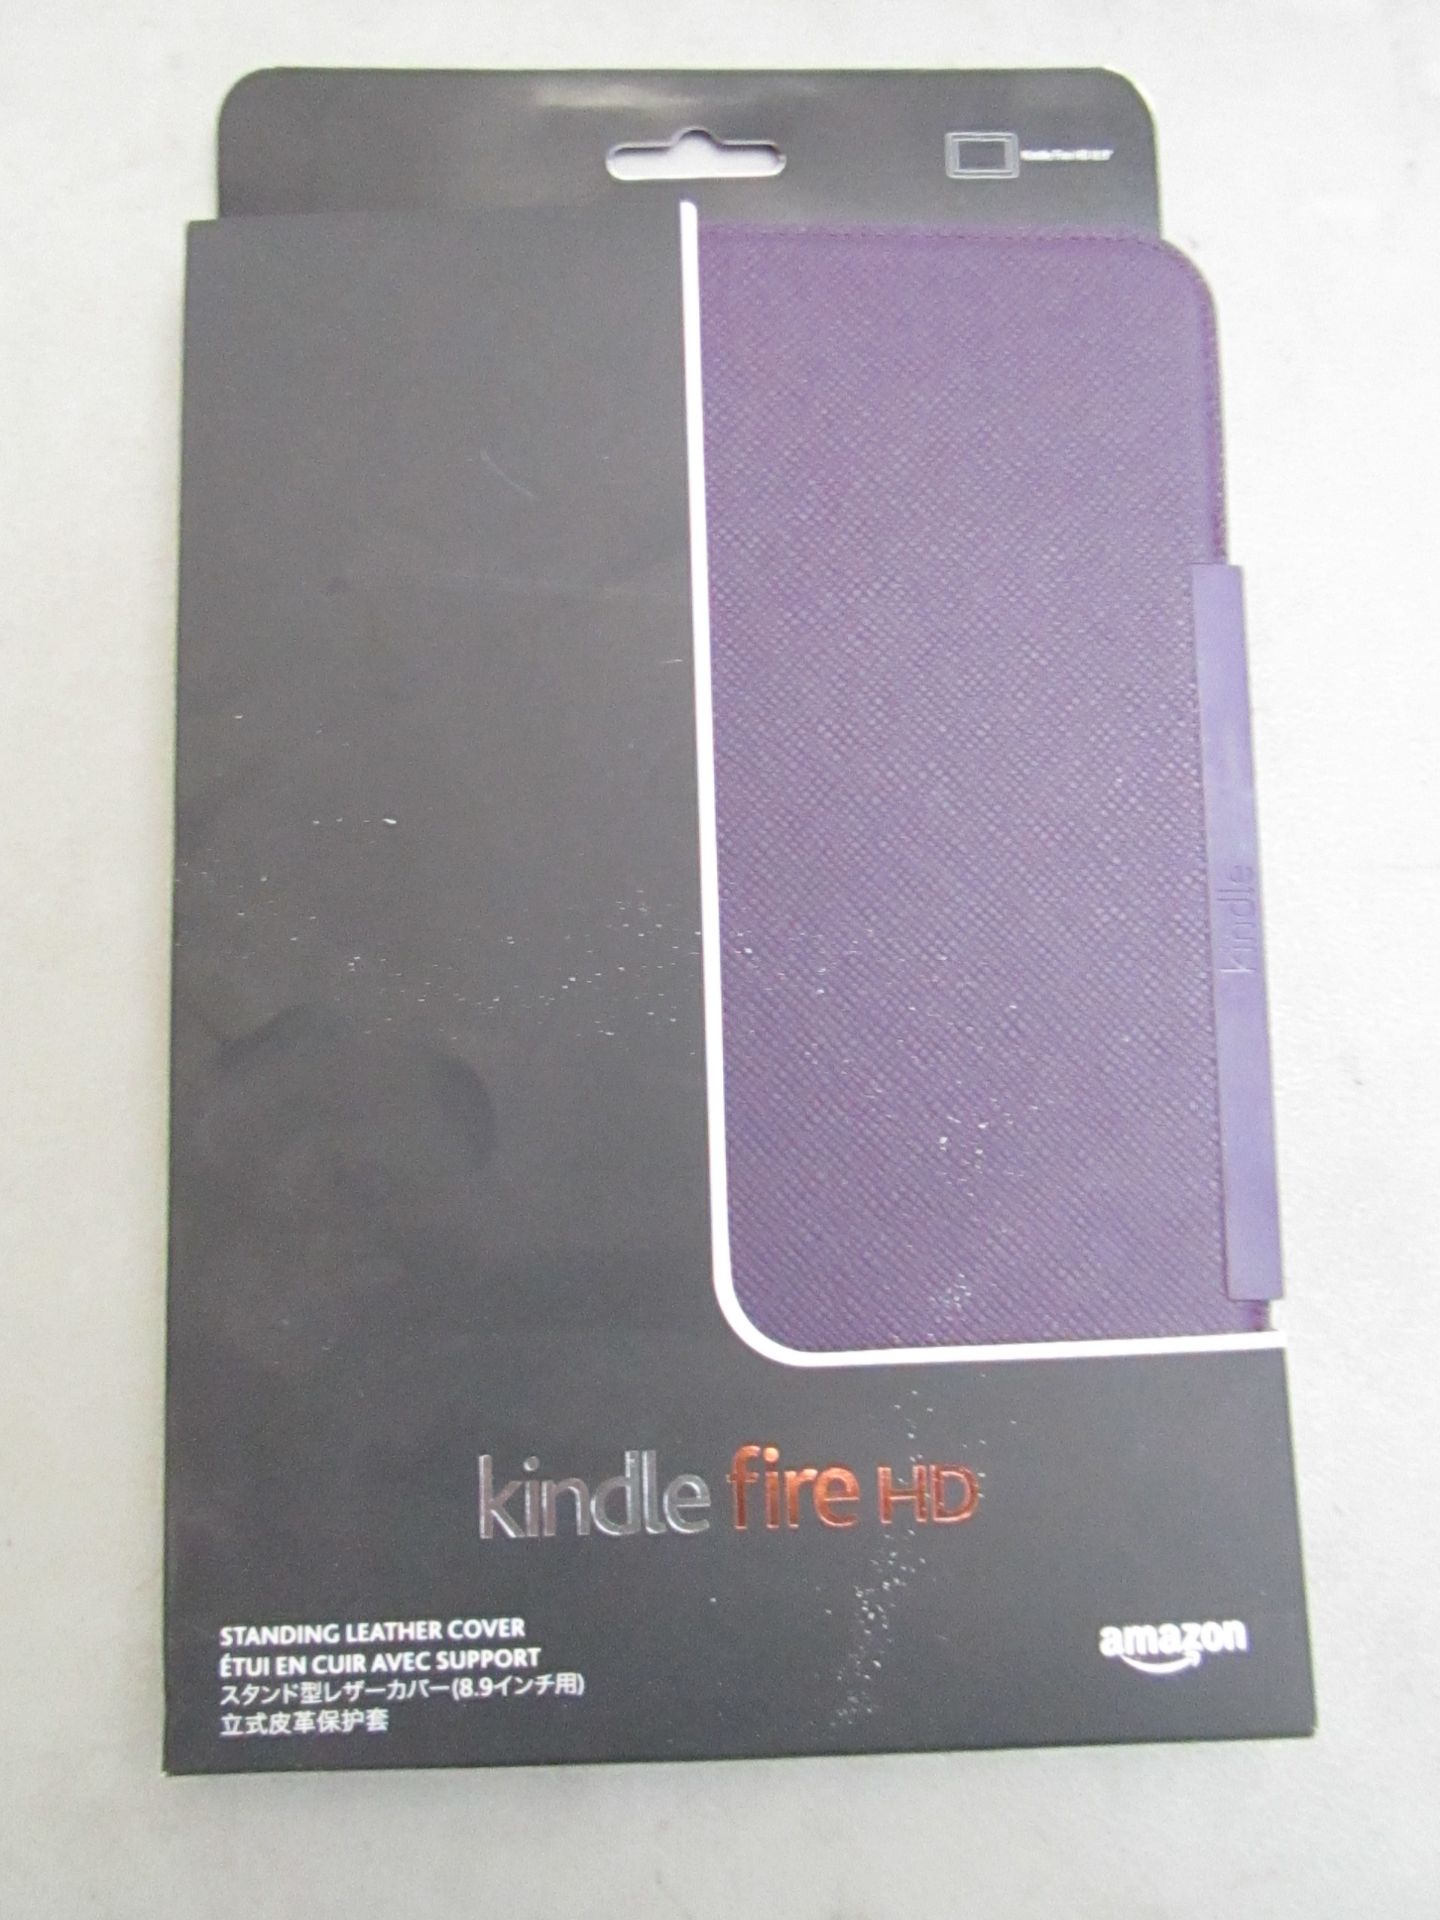 10x Kindle Fire HD Staning Leather Covers, new in packaging